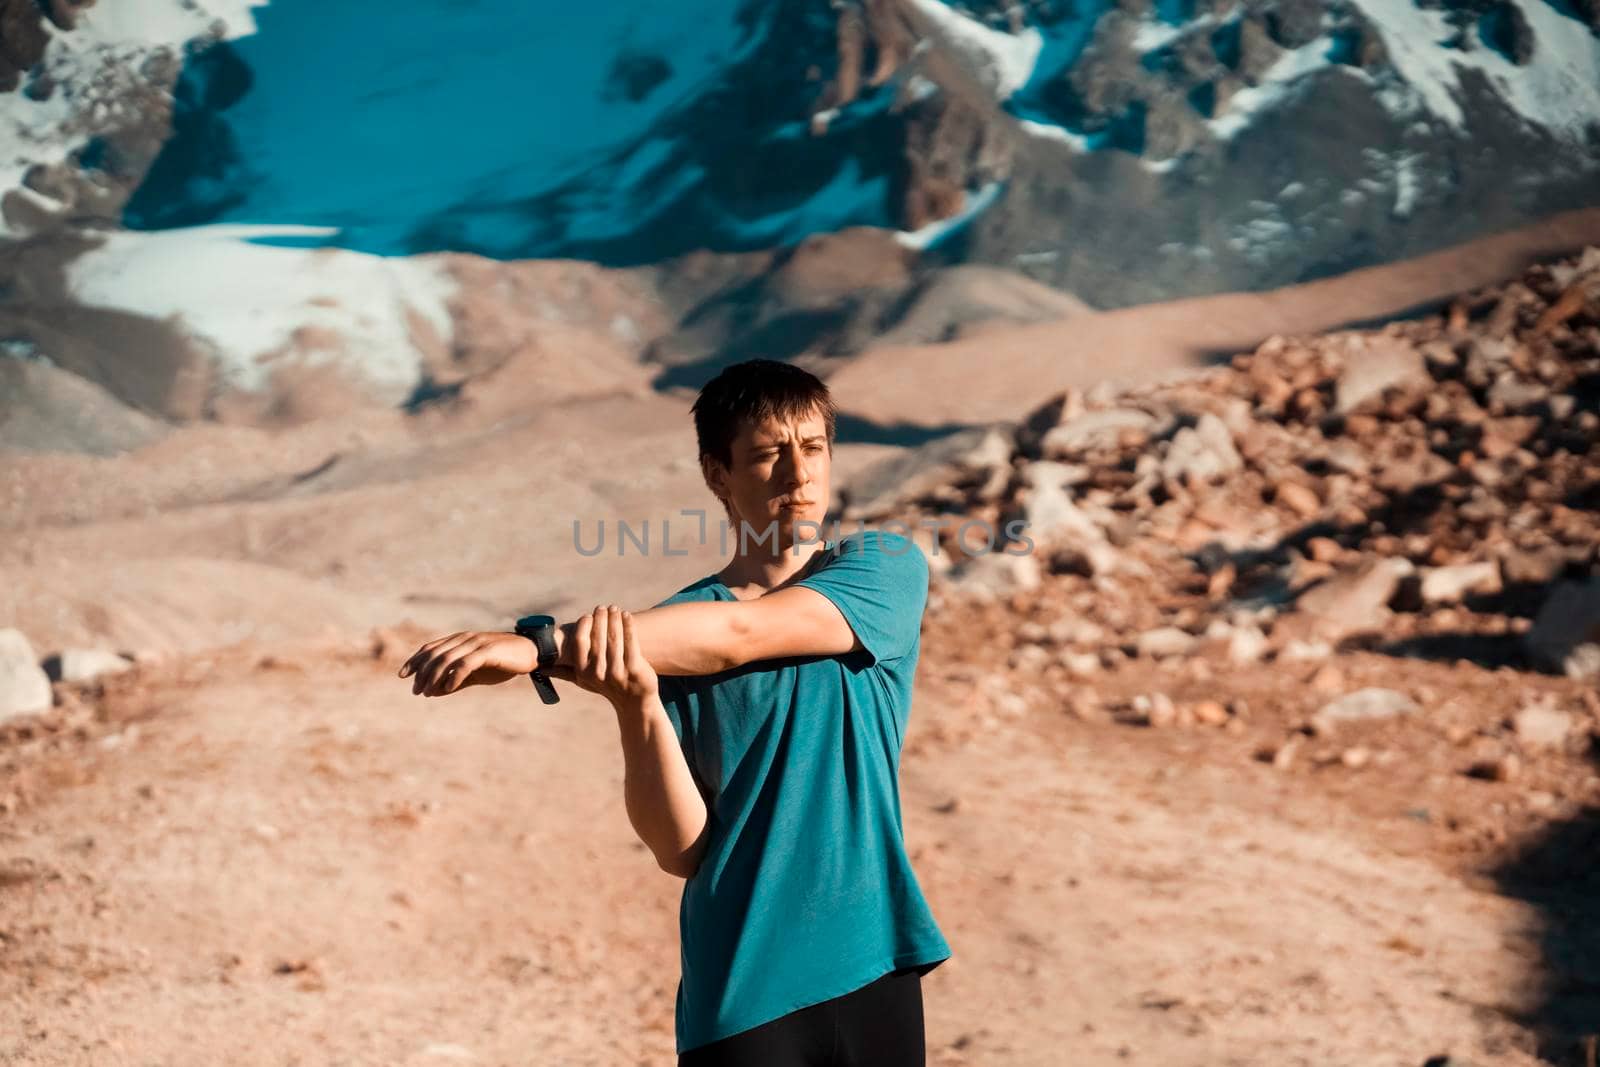 A young man does a warm-up before a trail and canyon race in the snow-capped mountains. The runner trains outdoor, does exercises in beautiful area.